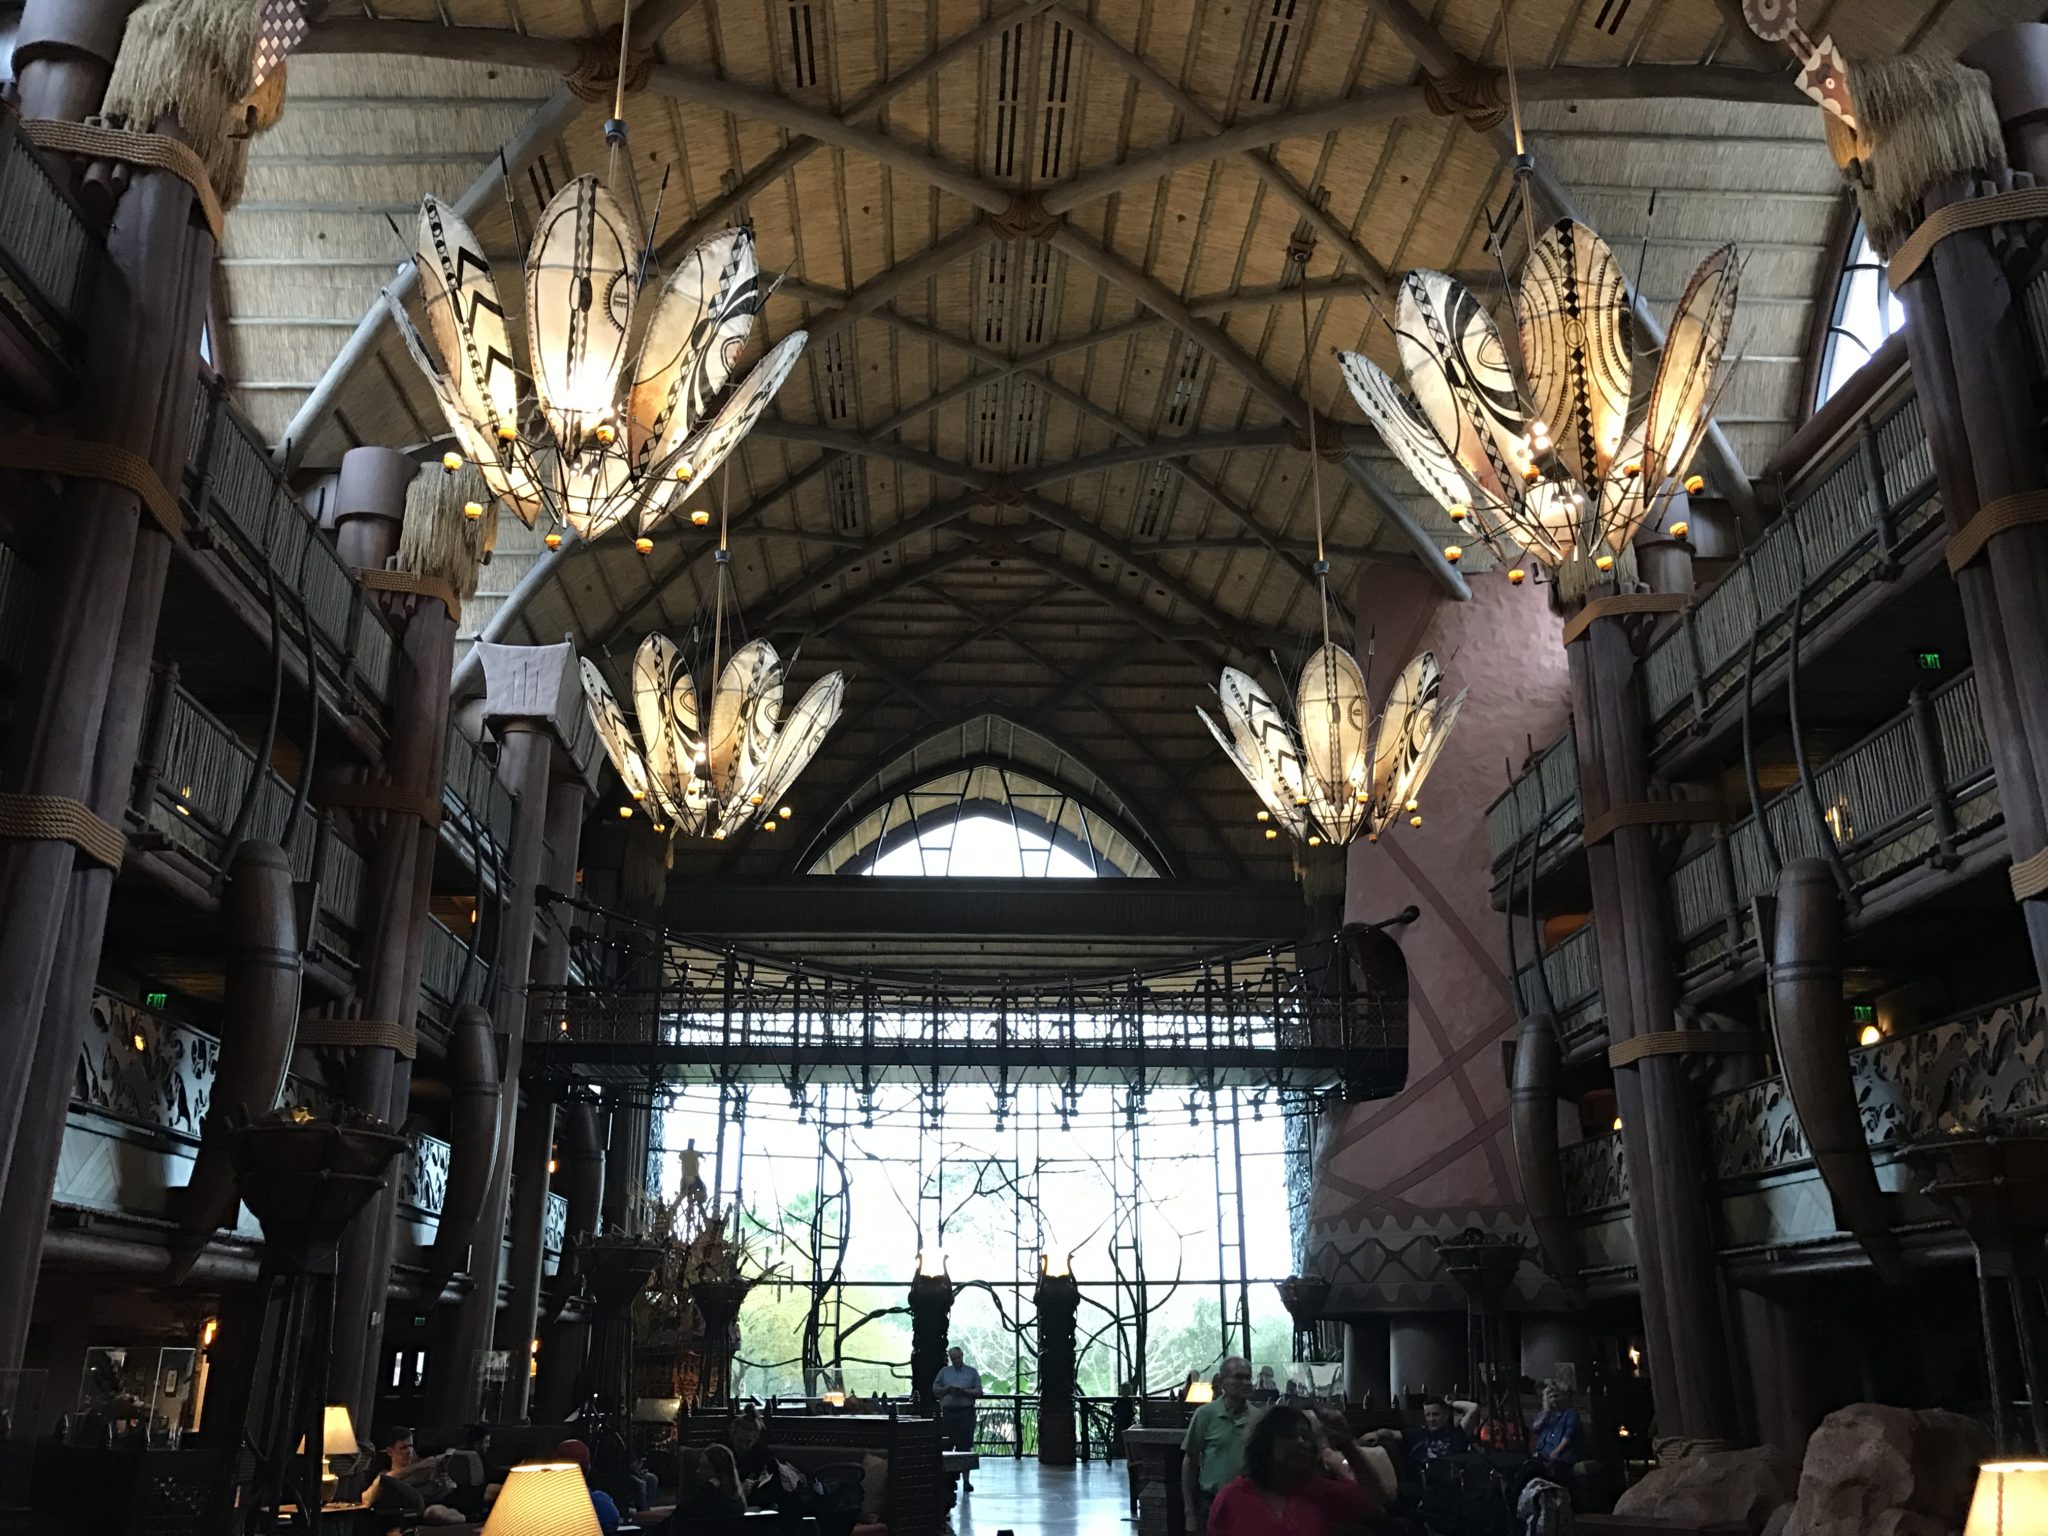 Where to Stay for a runDisney Race – Animal Kingdom Lodge